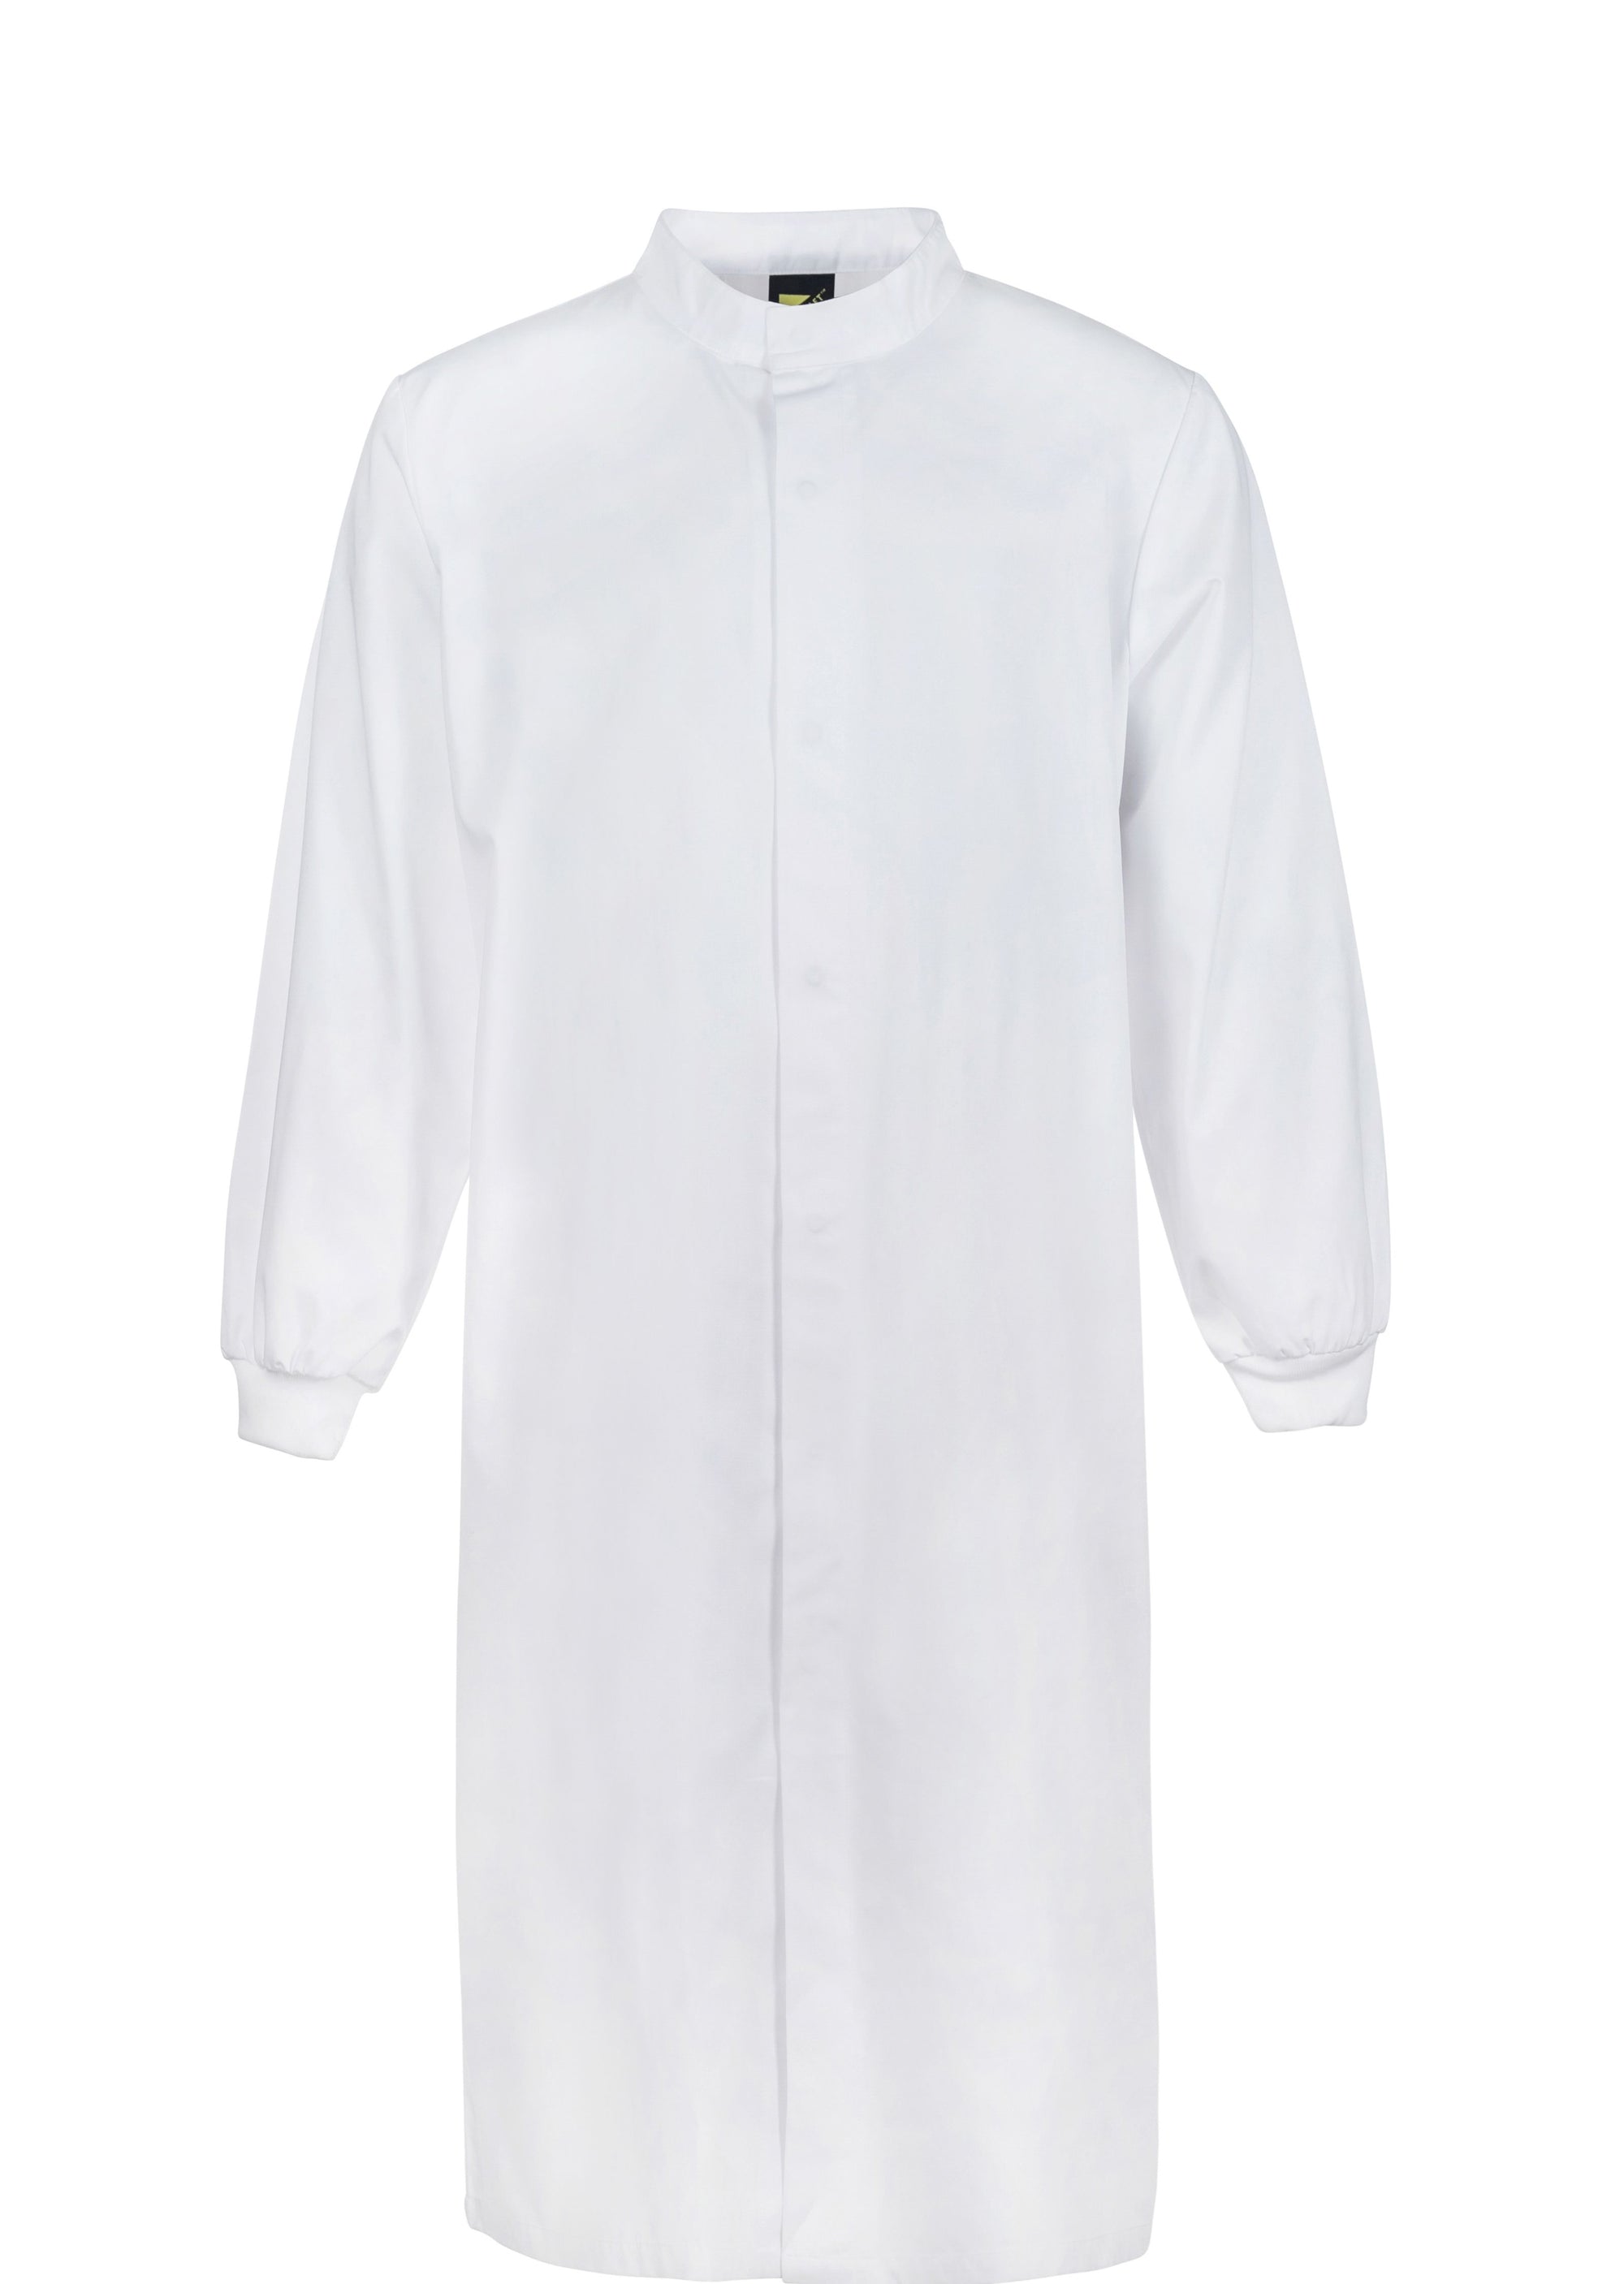 WorkCraft Mens Food Industry White Dustcoat with Mandarin Collar ls 220g L